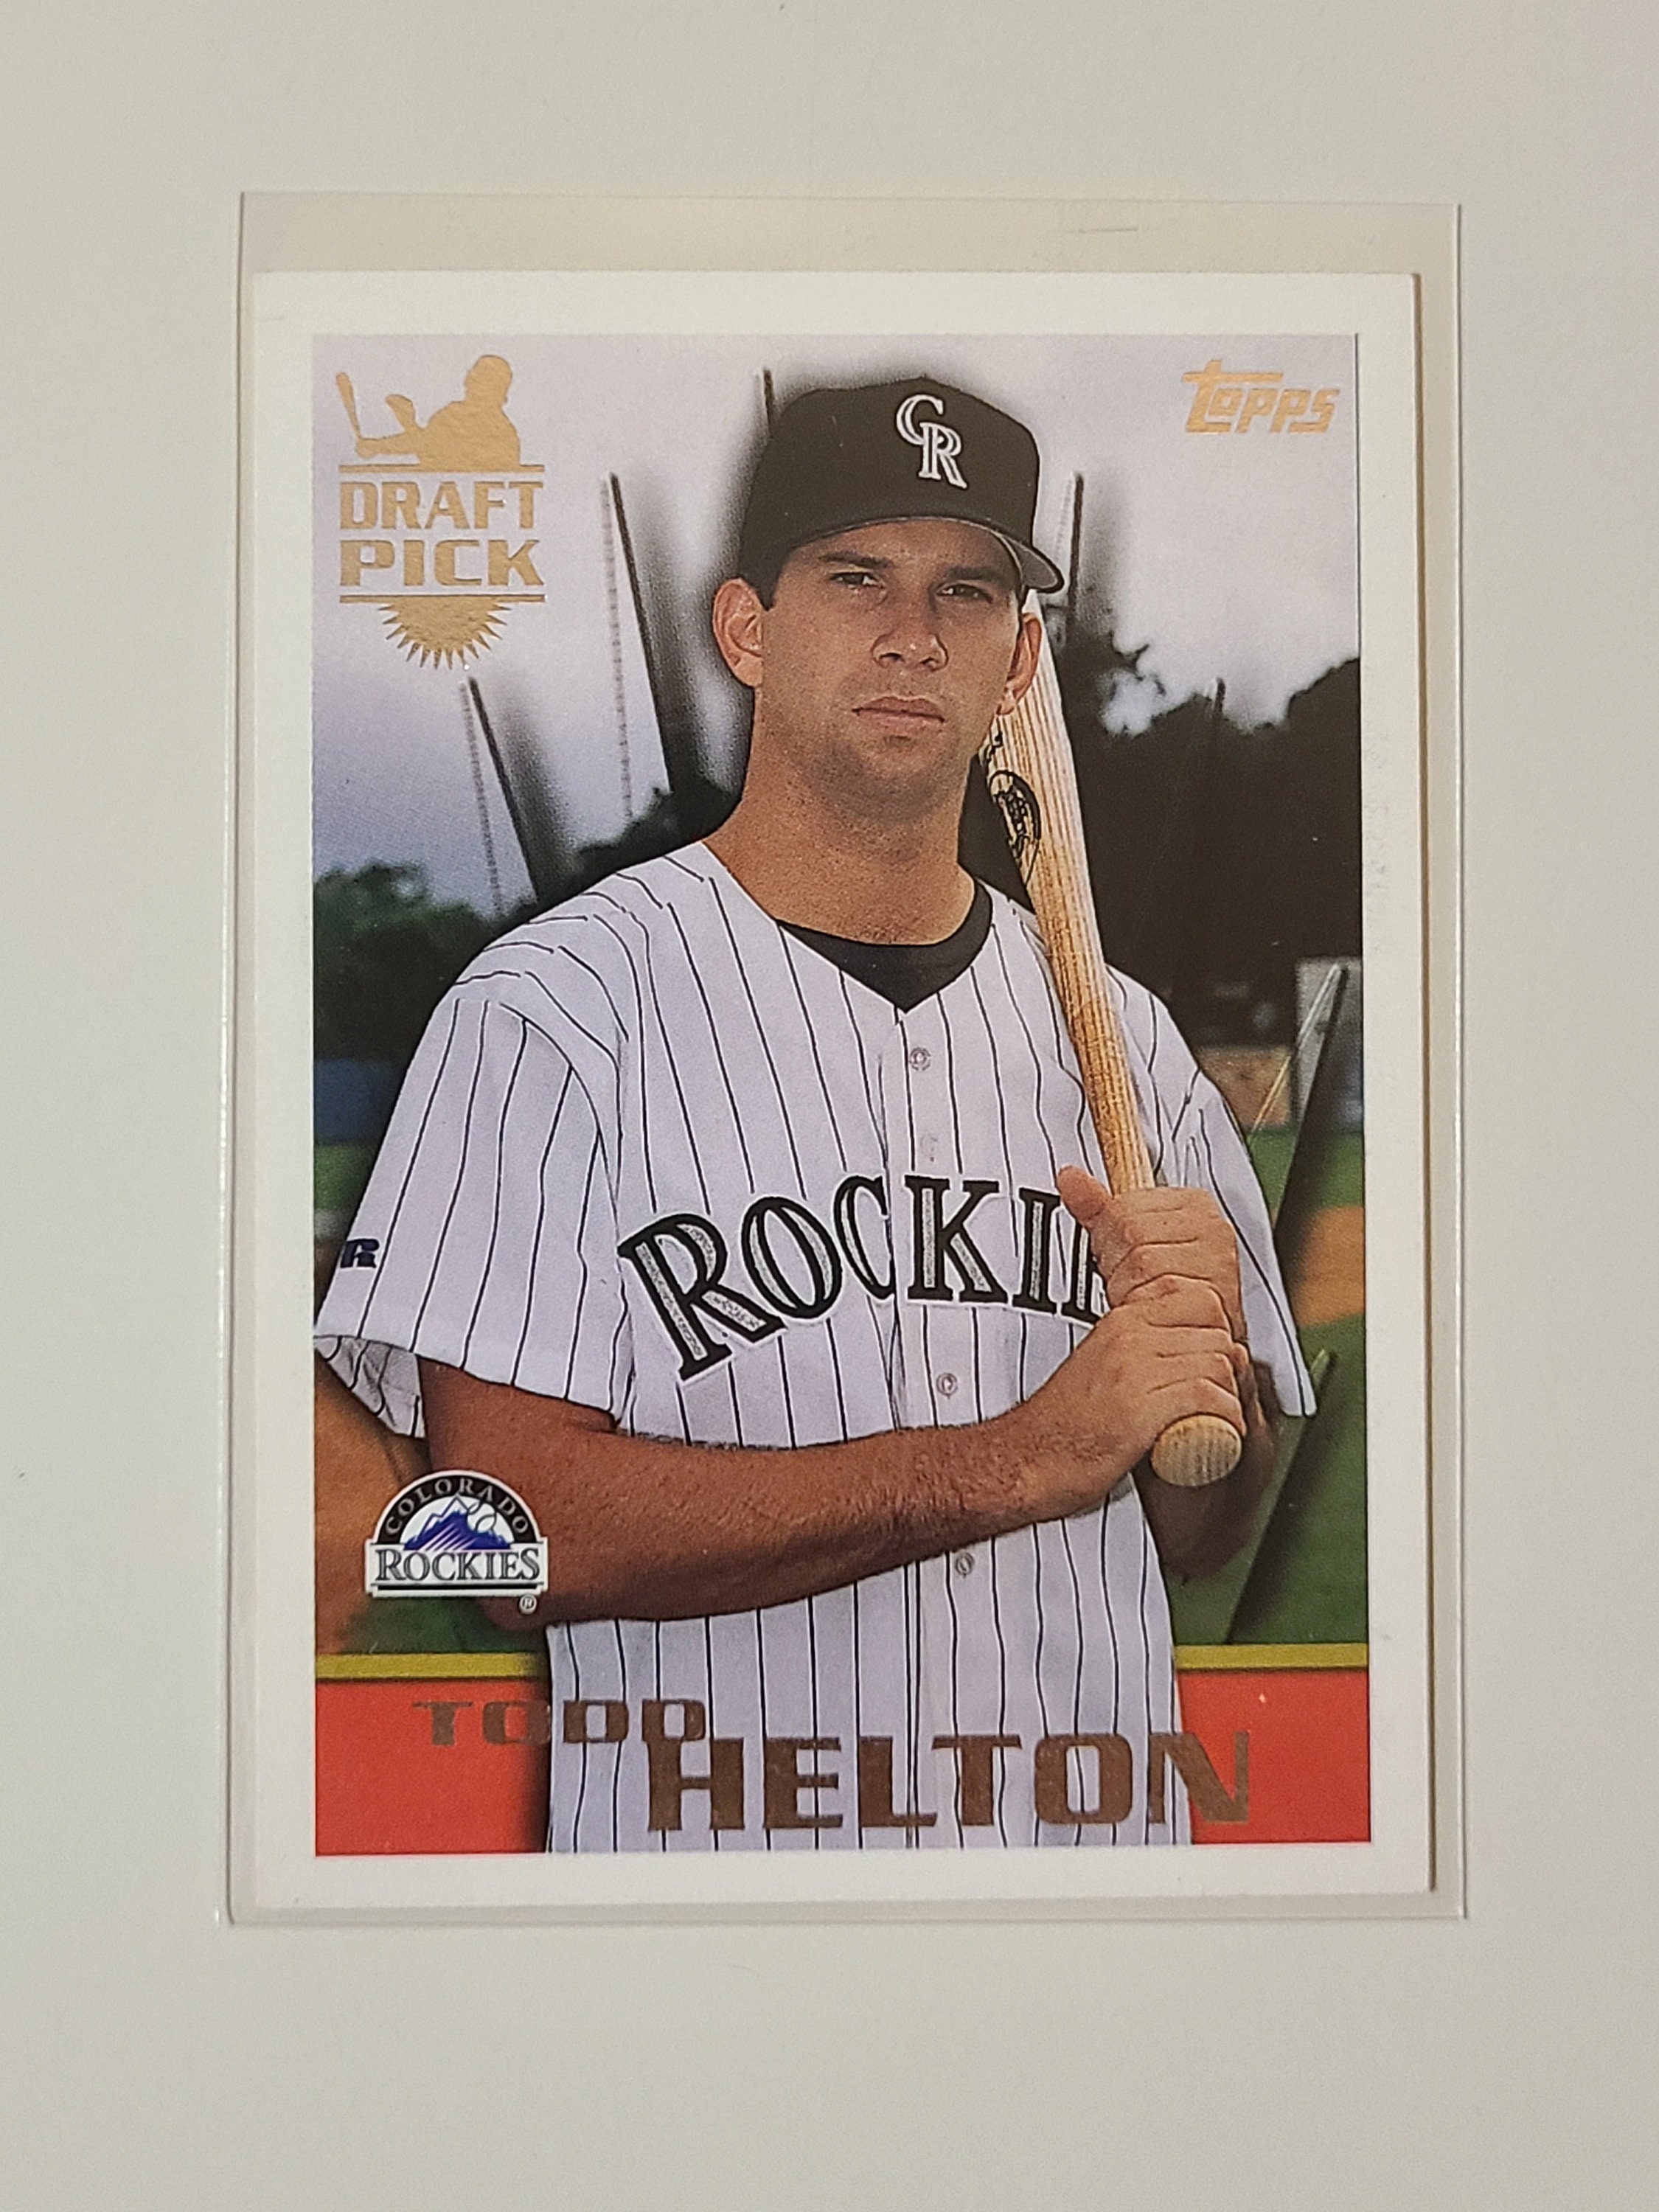 1996 Topps Todd Helton RC Rookie Baseball Card 